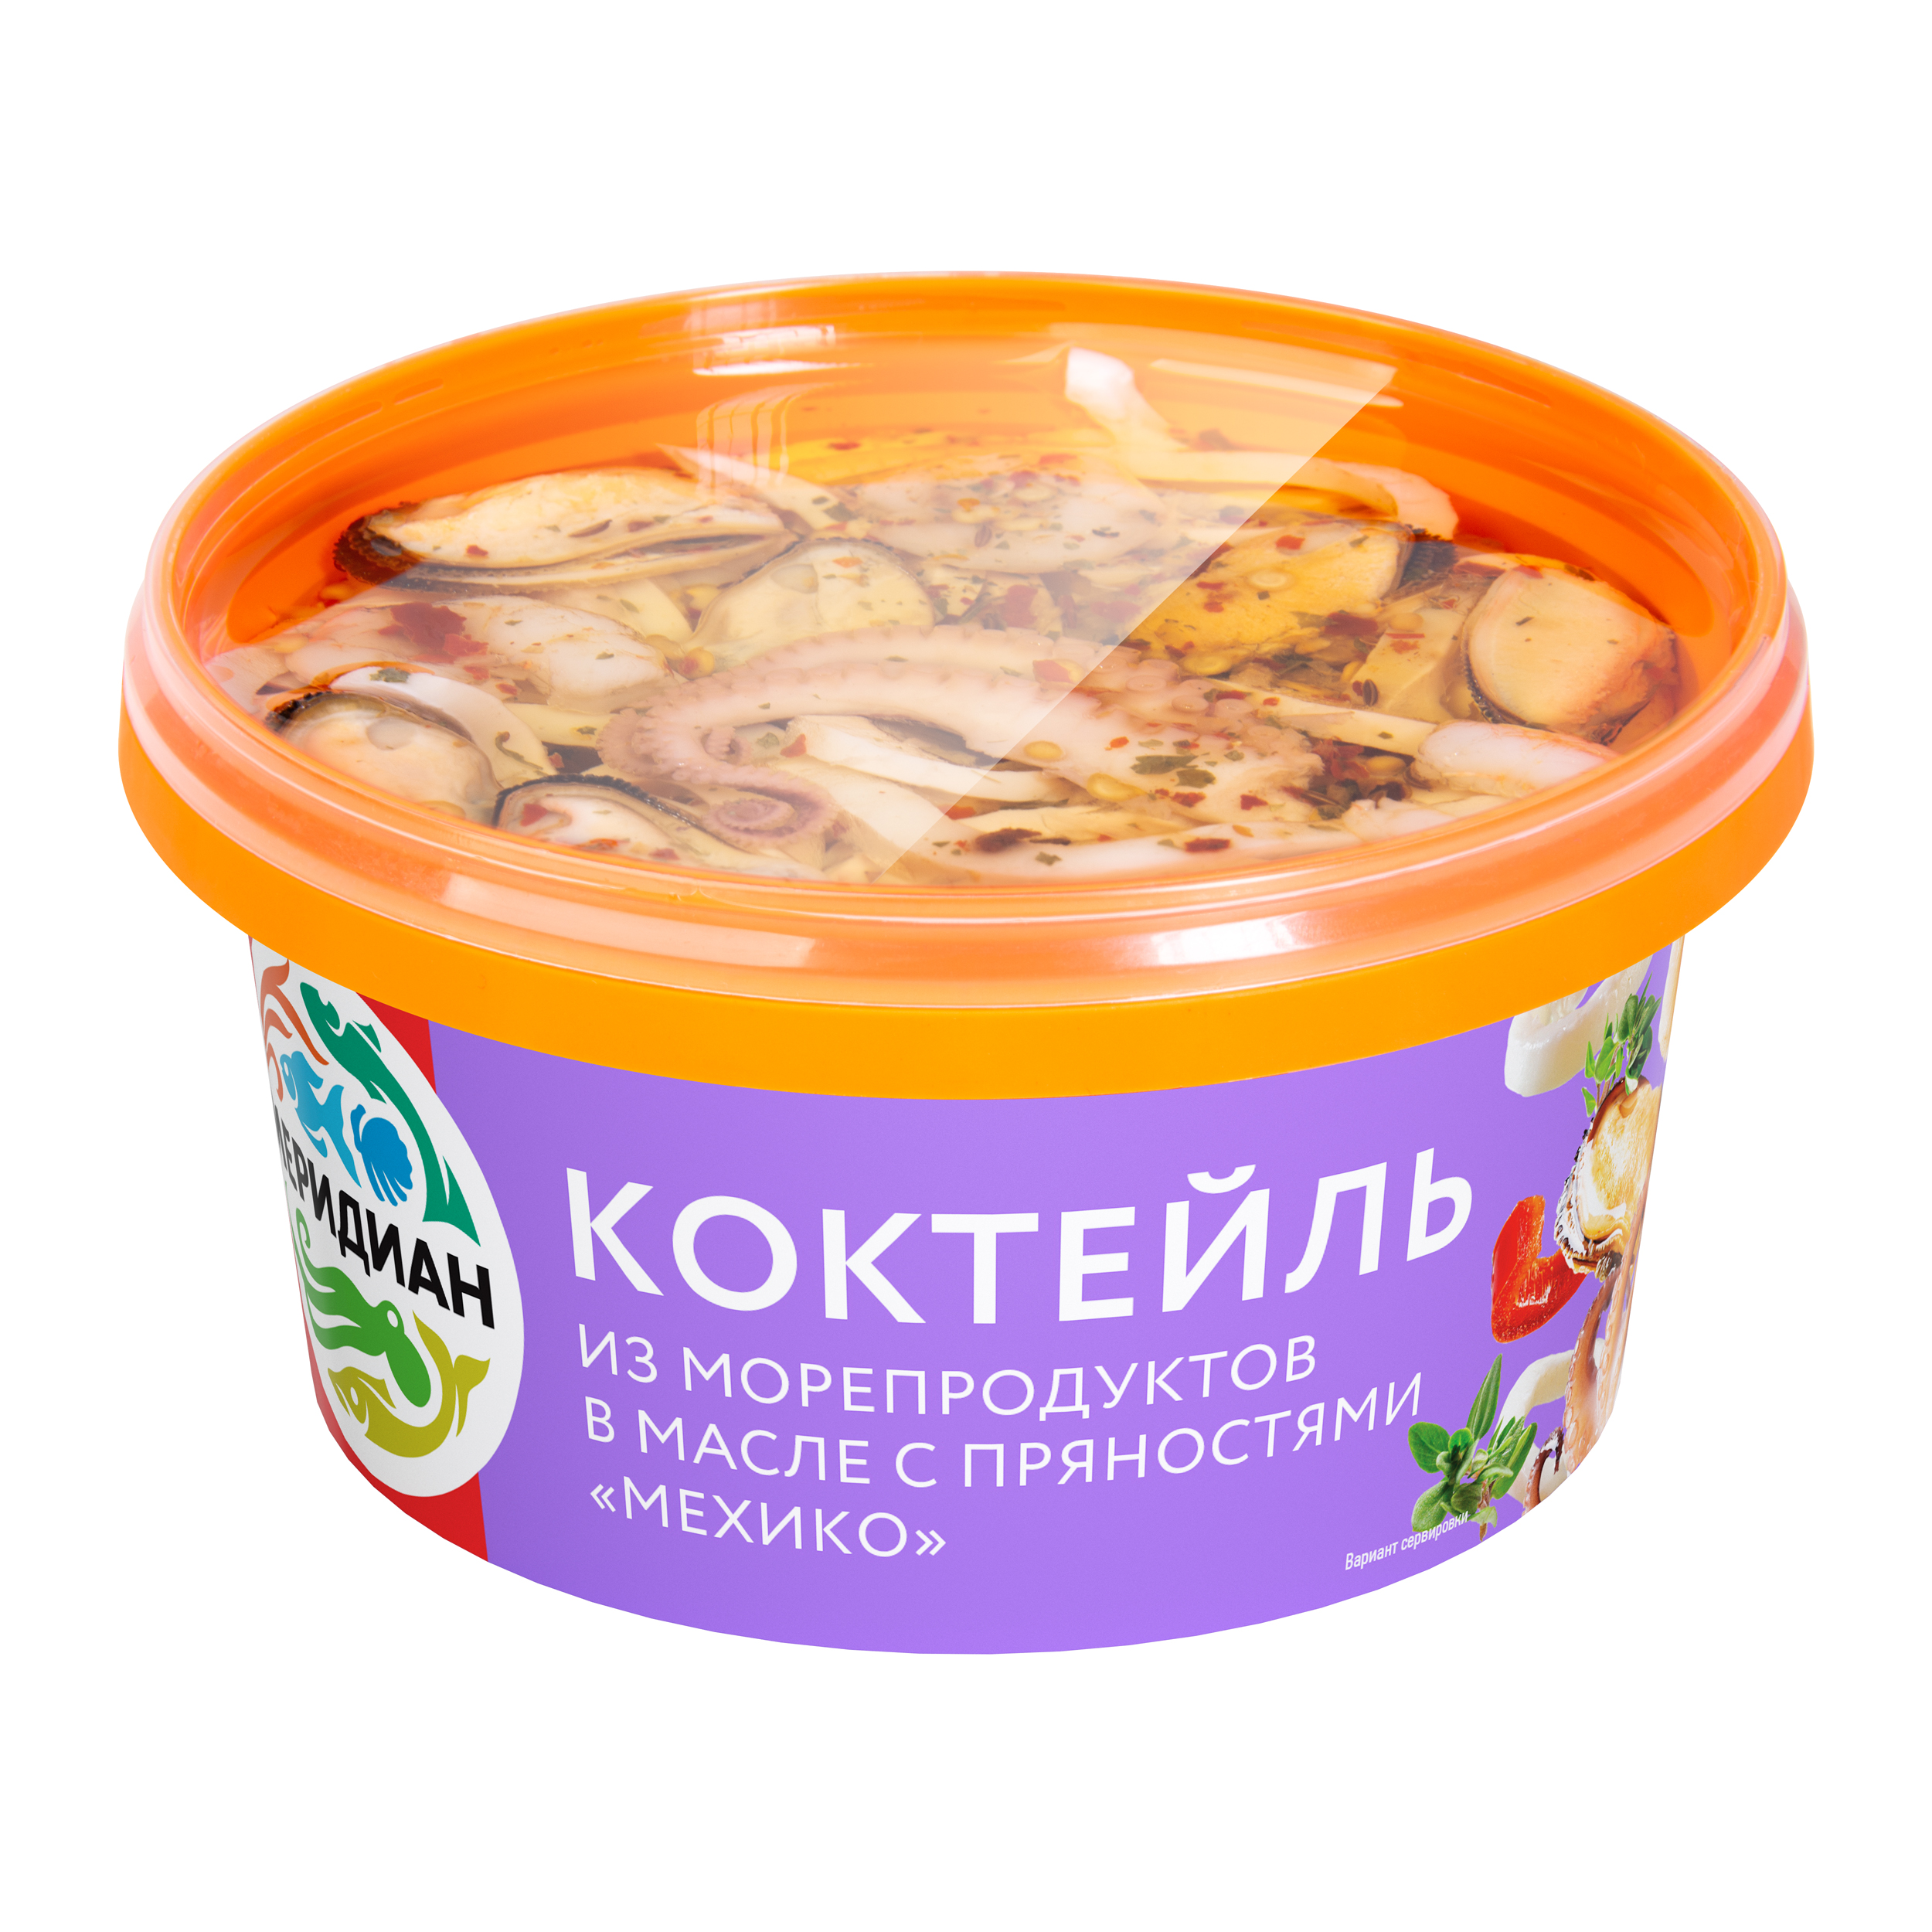 Seafood cocktail in oil with spices "Mexico", 430 g